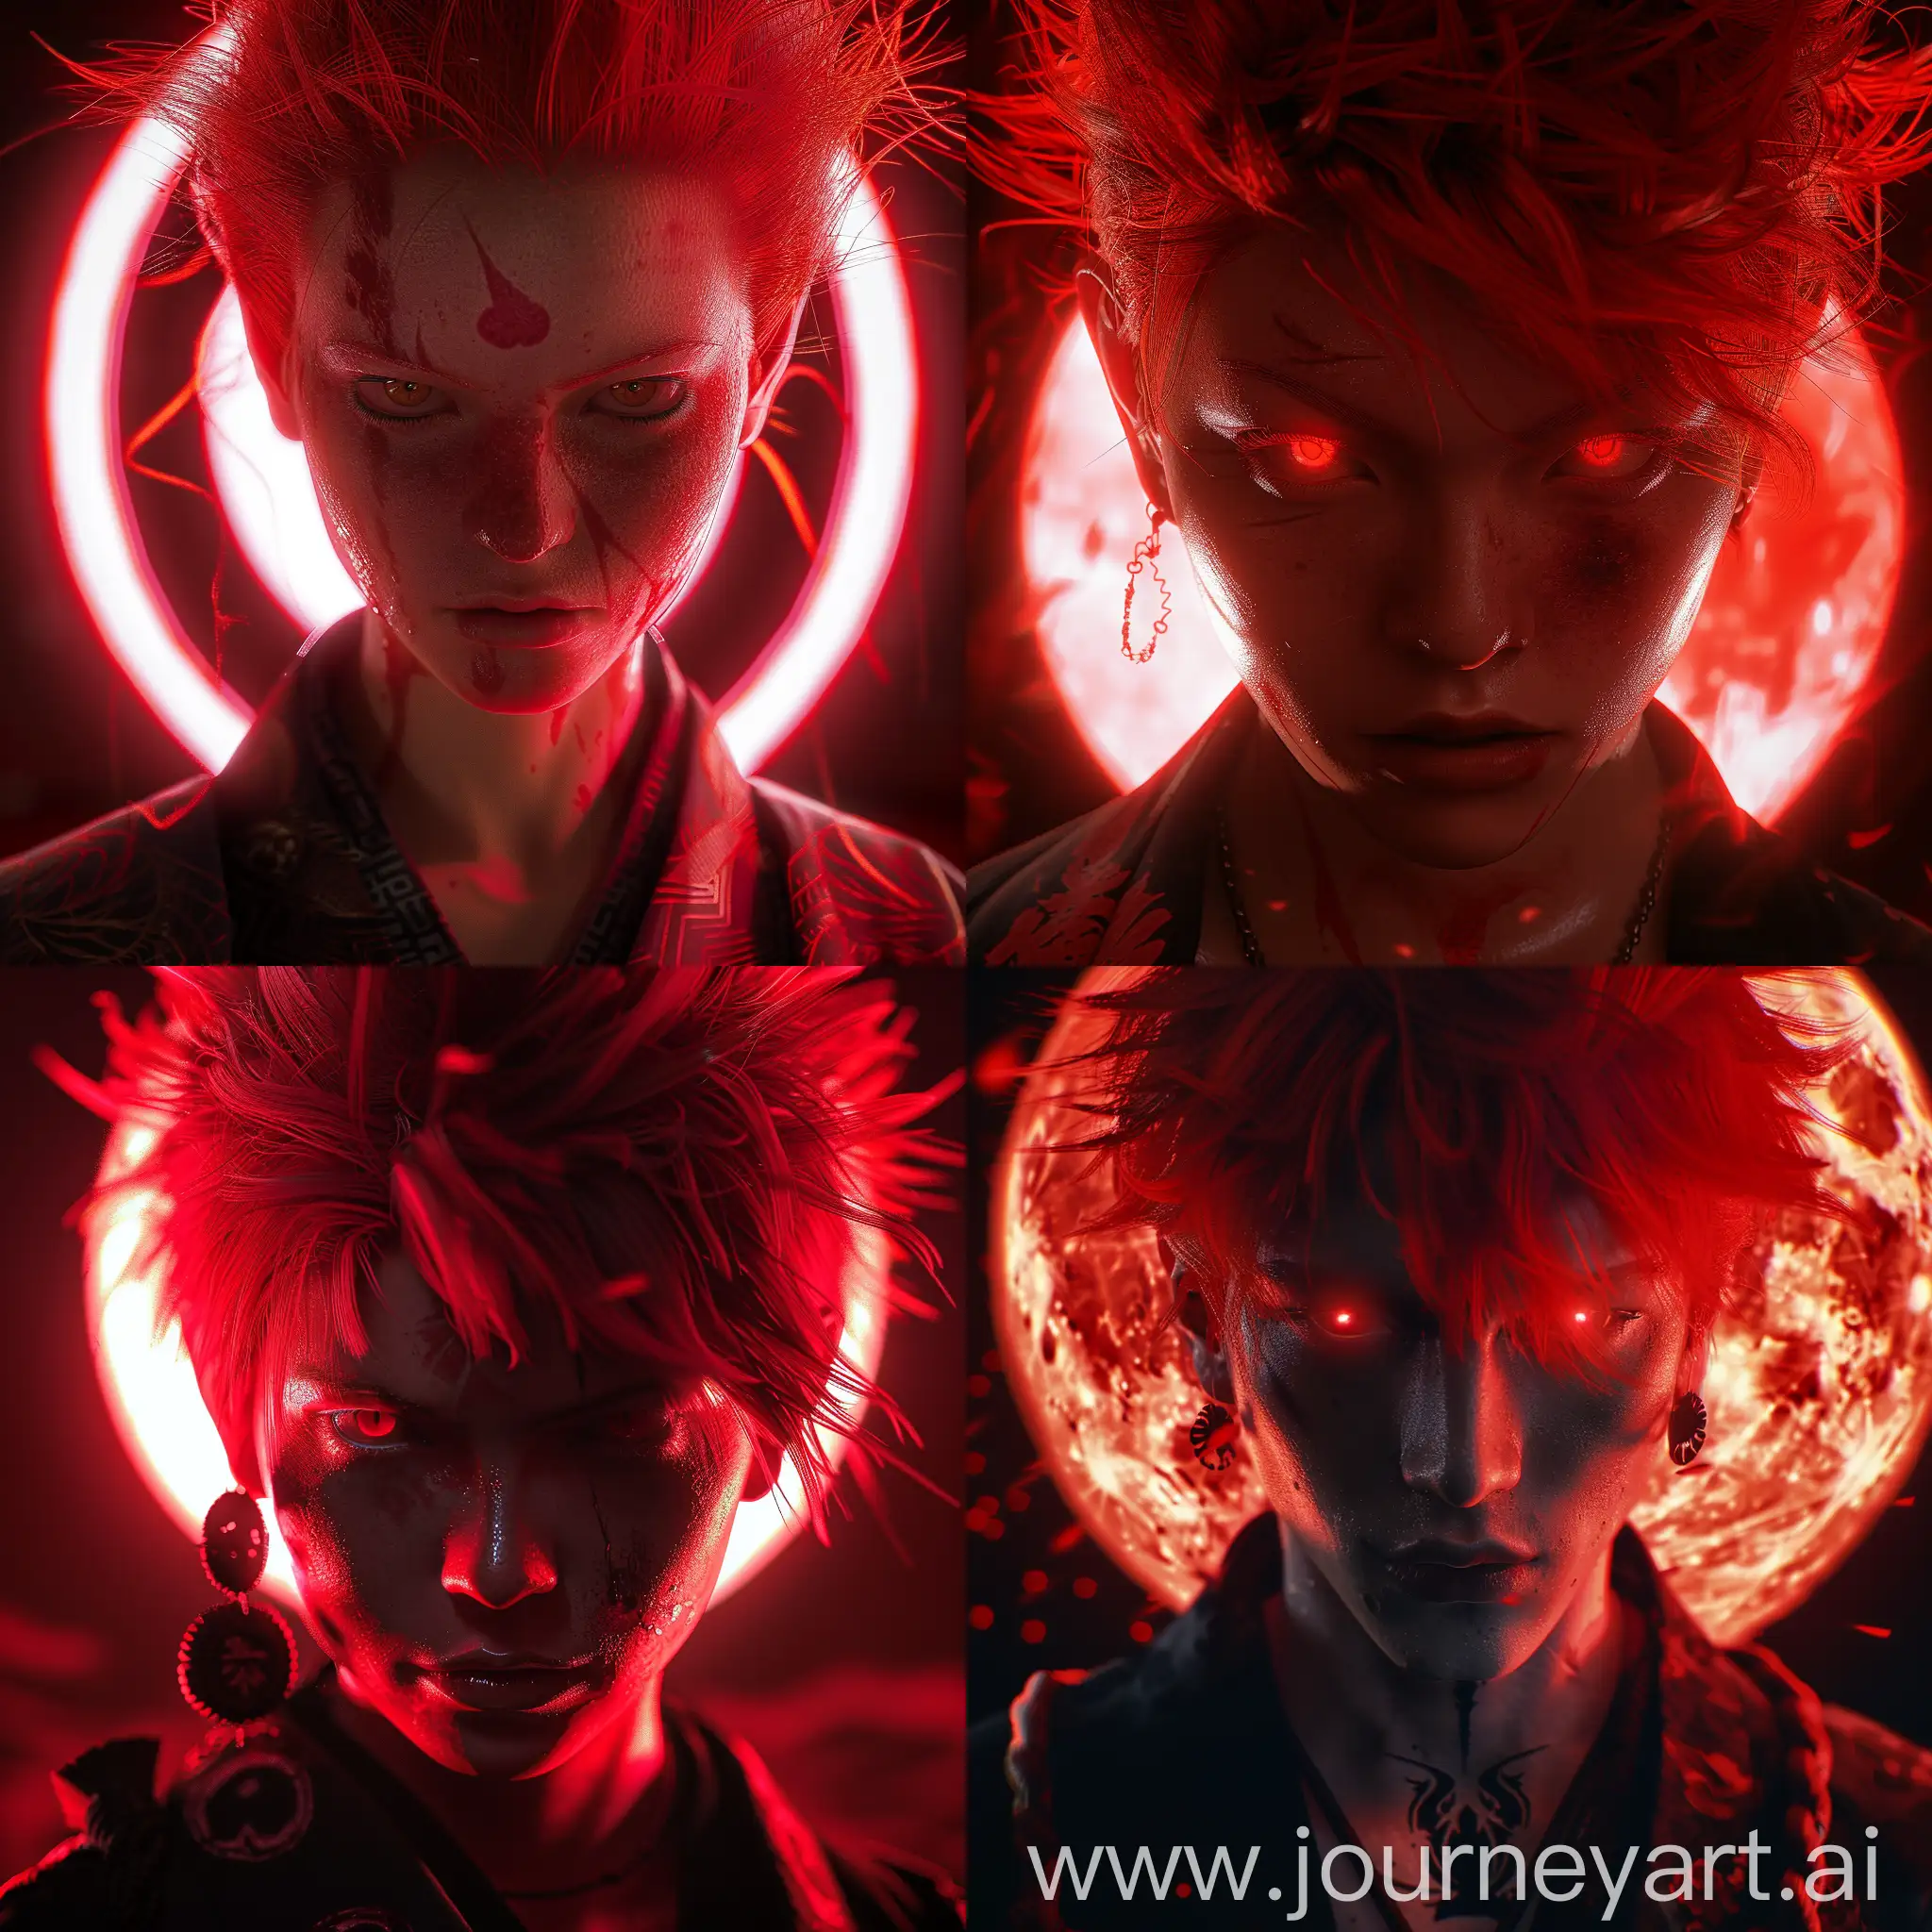 Sukuna-Portrait-with-Red-Hair-and-Demon-Look-under-Full-Red-Moon